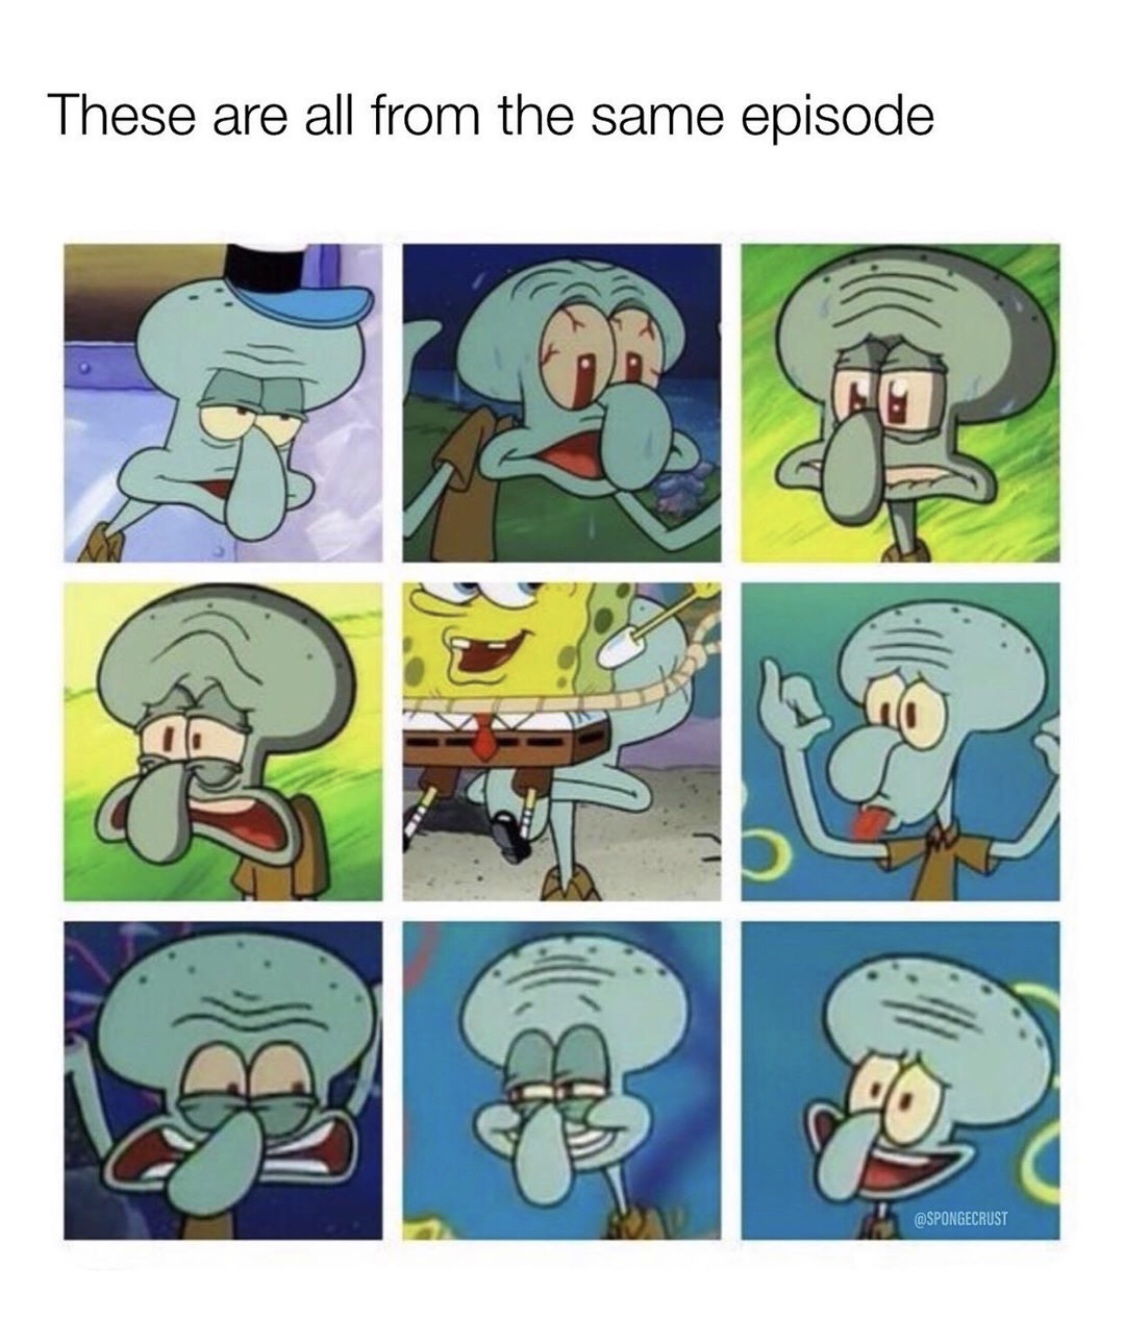 these are all from the same episode - These are all from the same episode